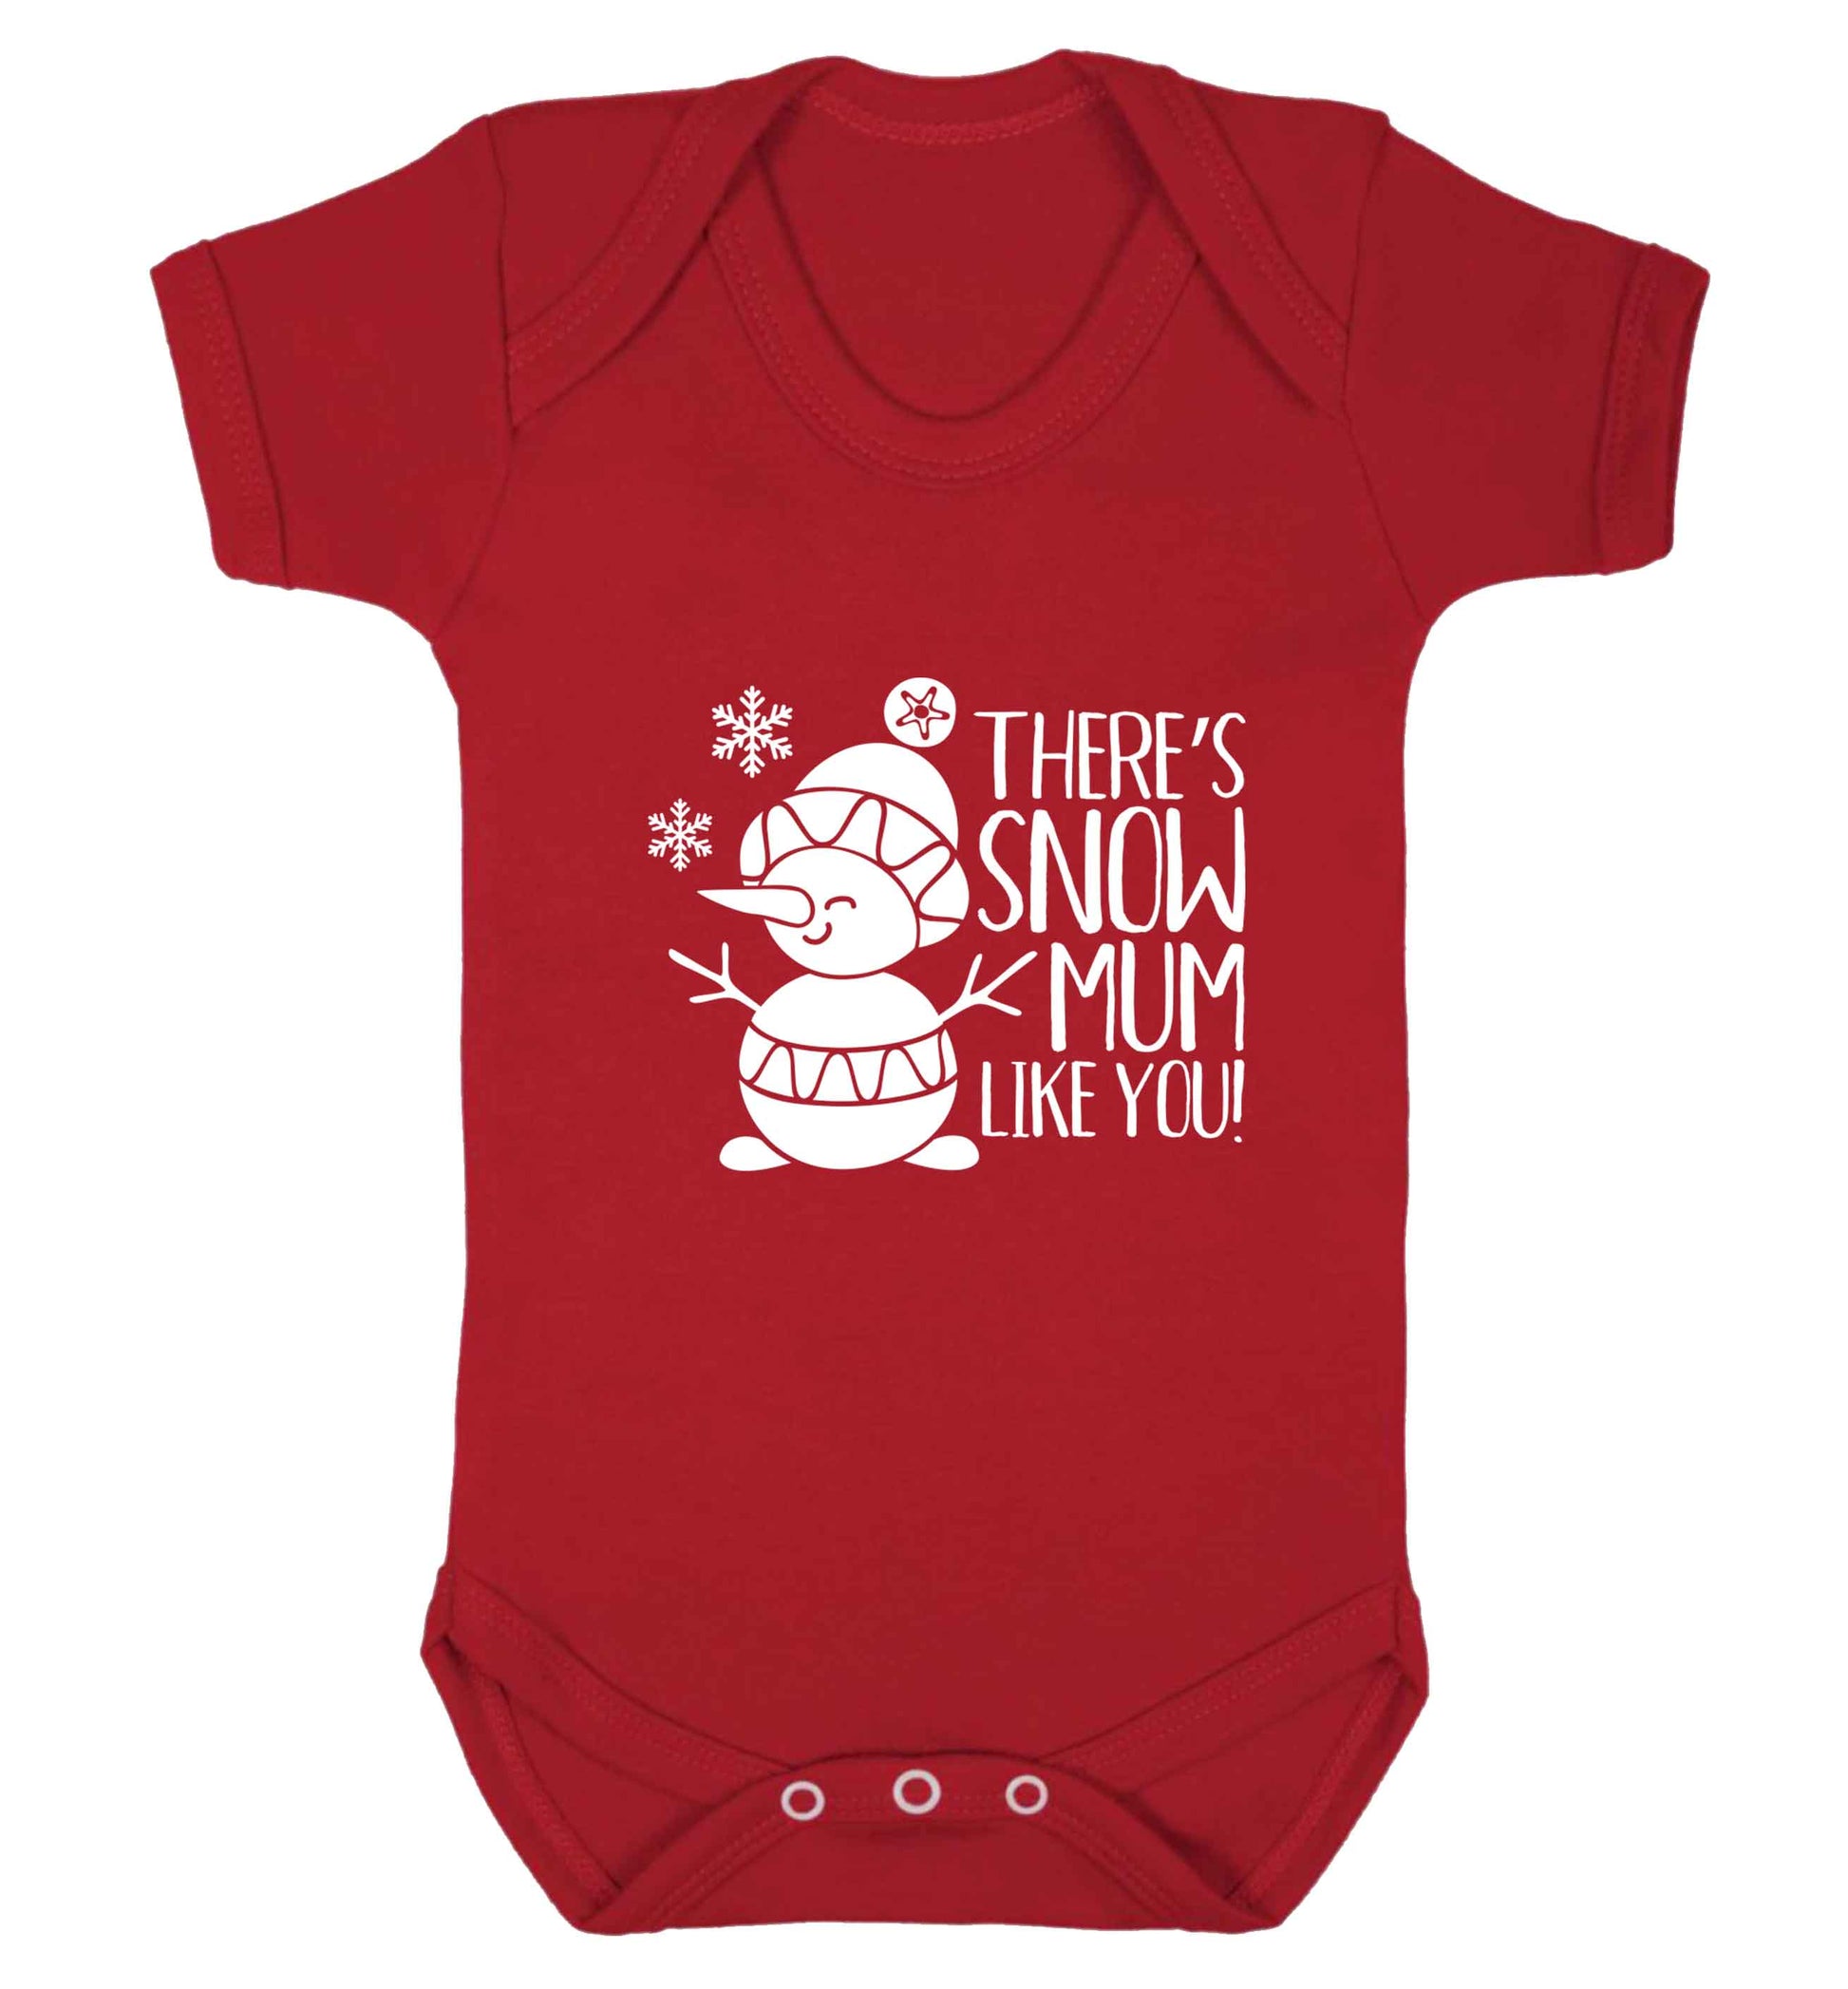 There's snow mum like you baby vest red 18-24 months